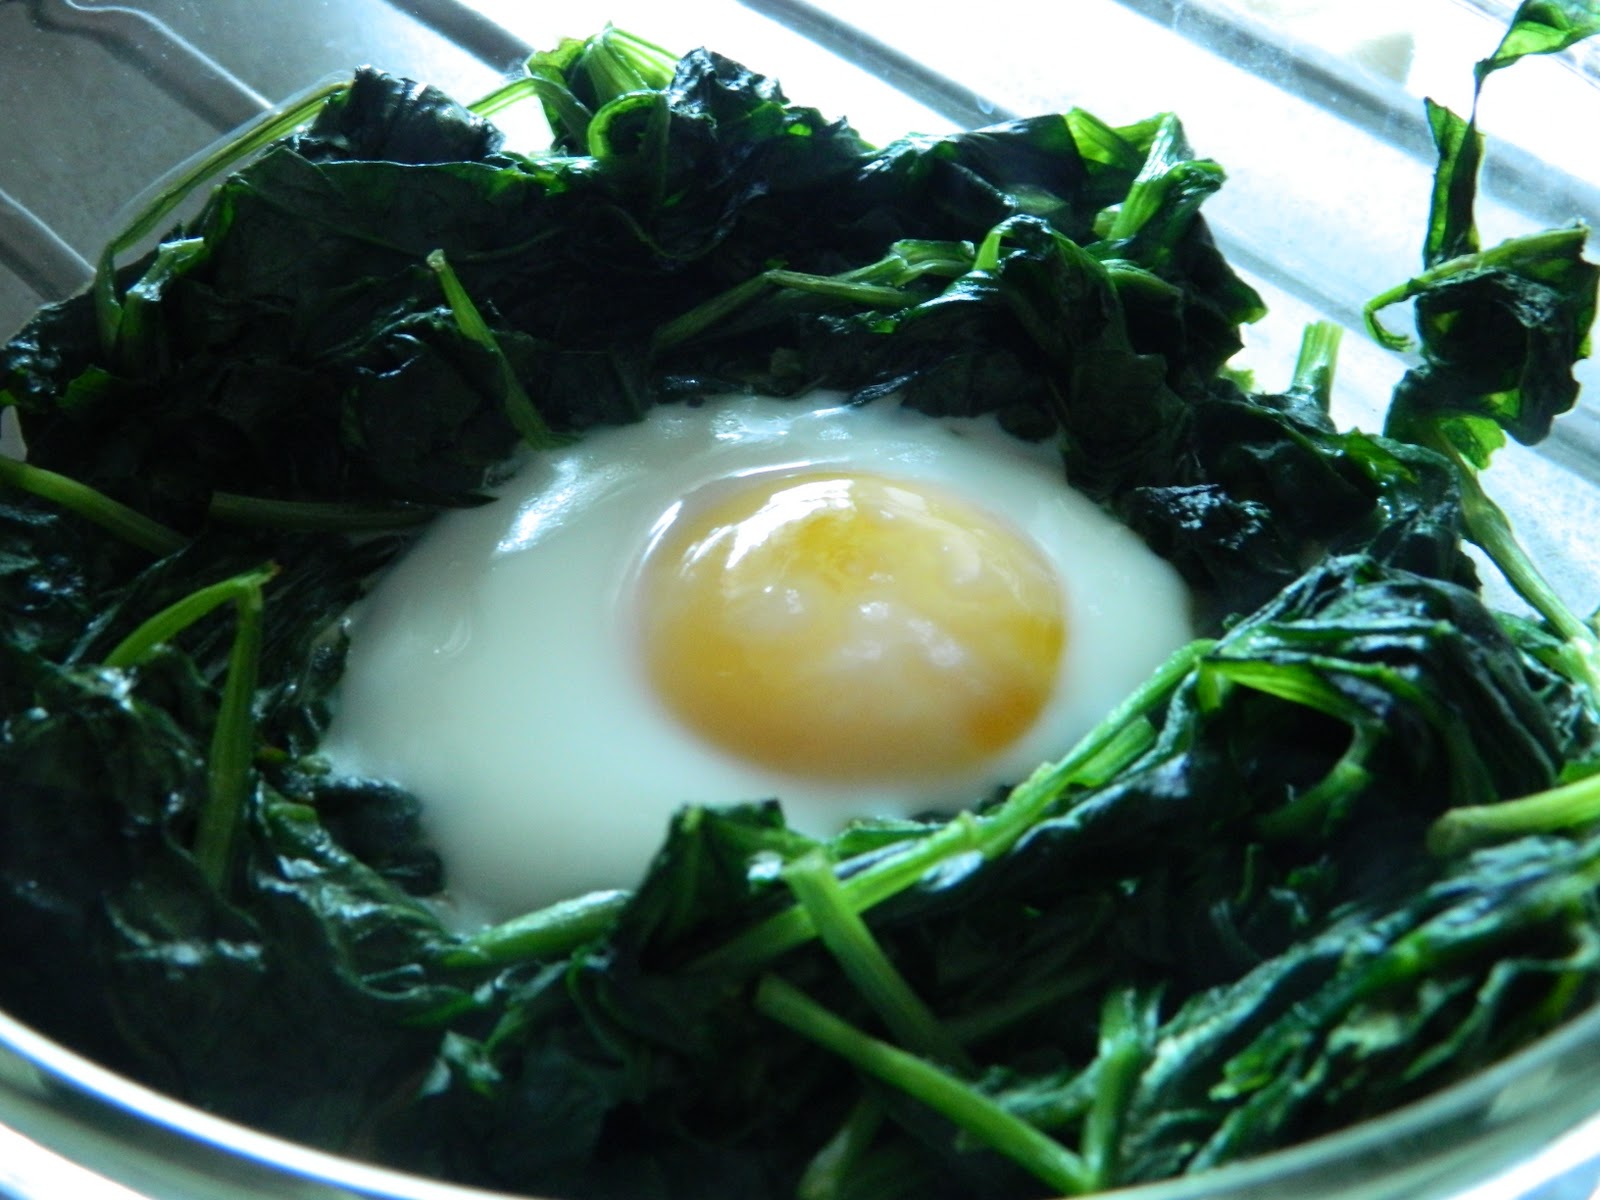 Lemon Love Notes: Baked Eggs w Spinach & Labneh (Ottolenghi style)